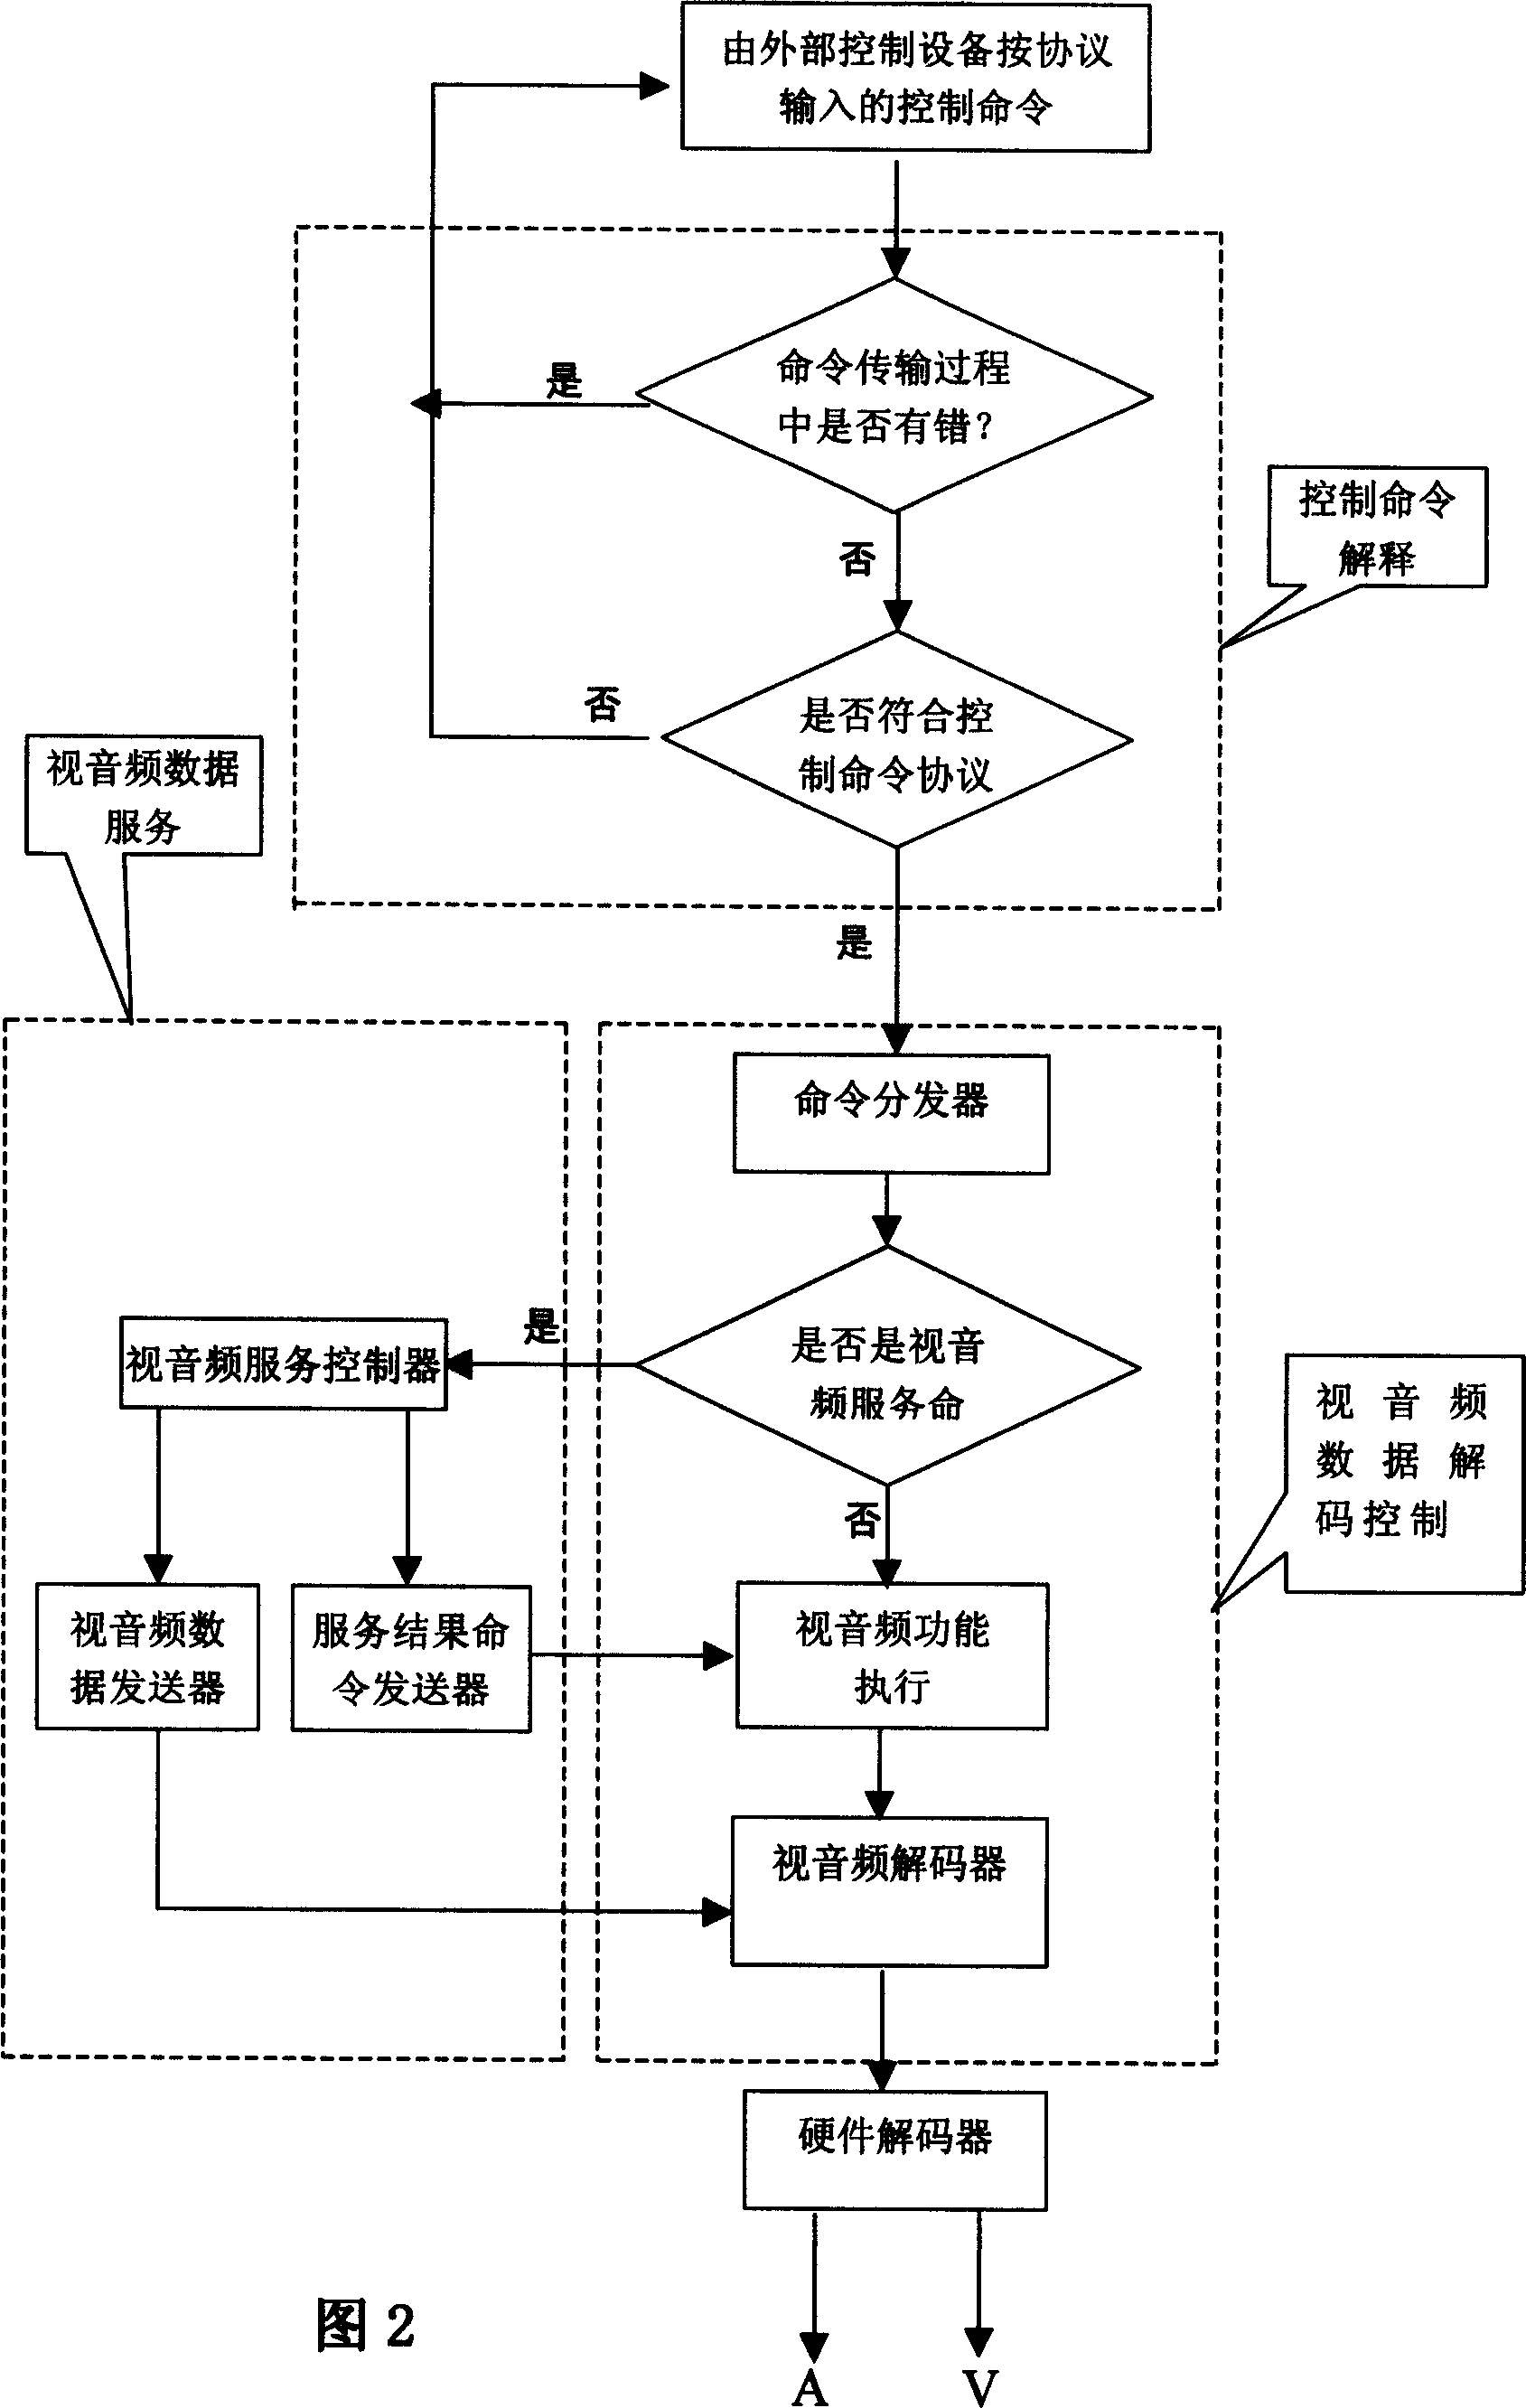 Inlaid hard-disc machine and TV broadcasting control mode